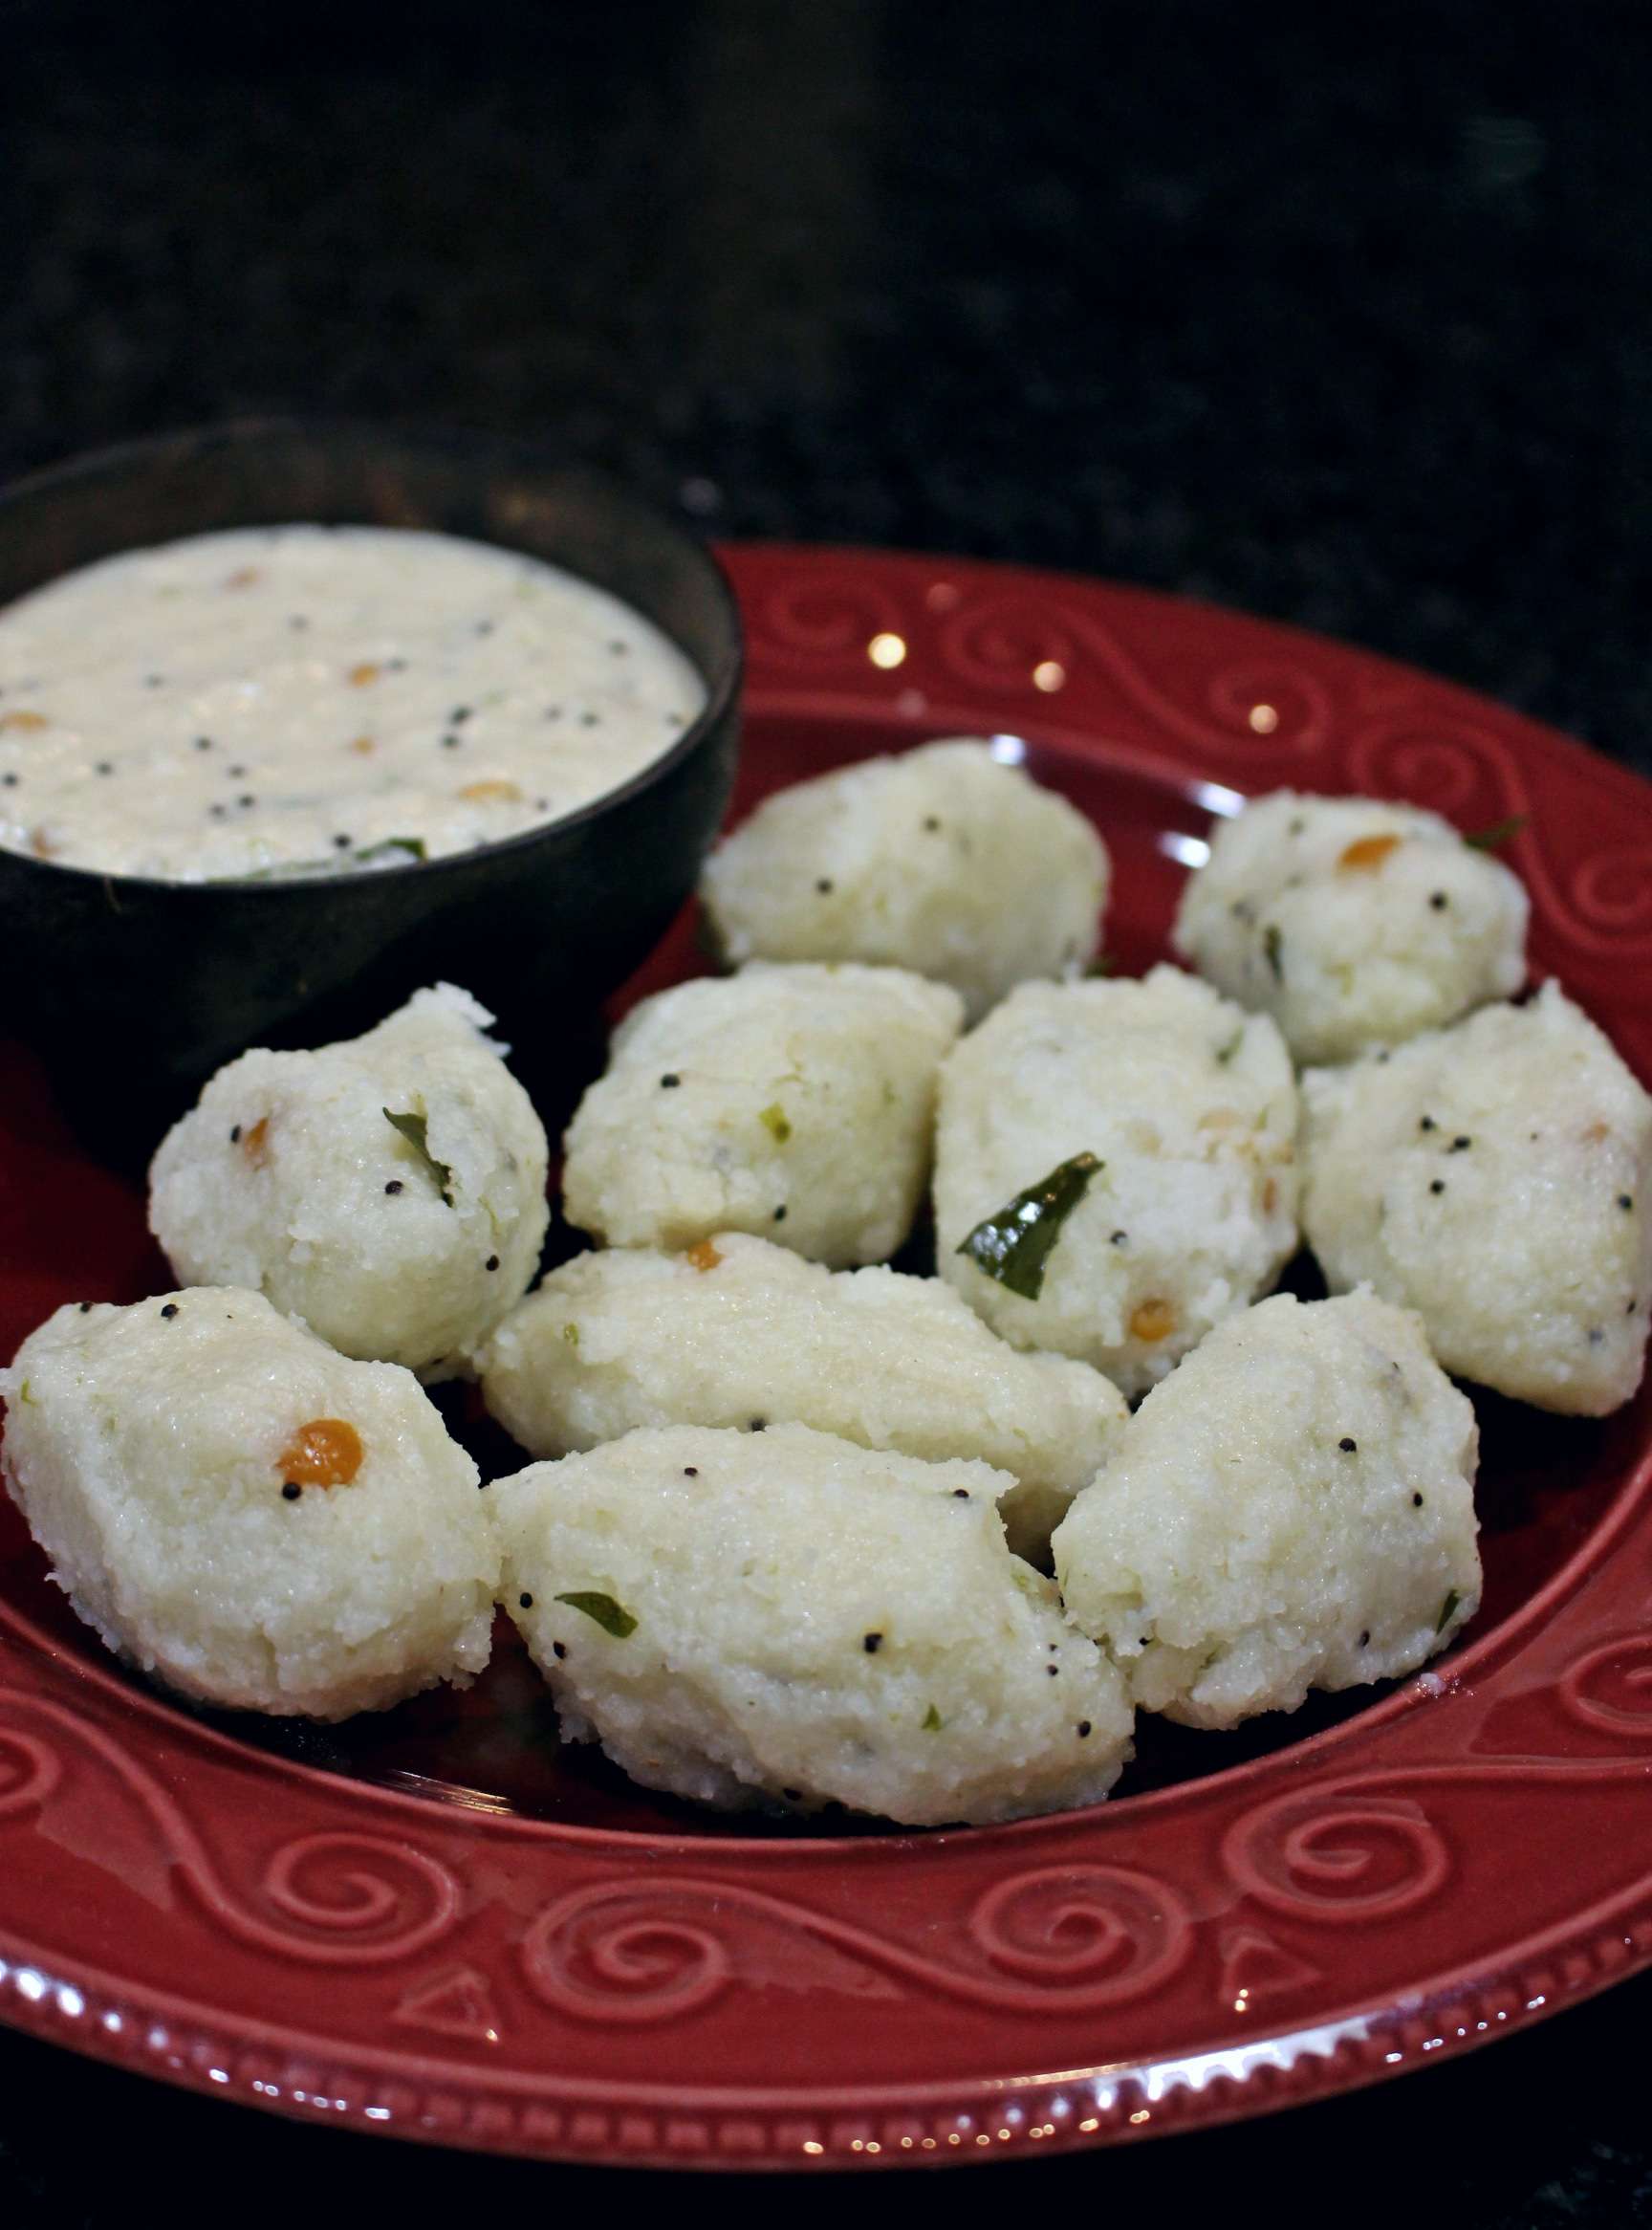 Steamed Savory Rice Balls with chutney